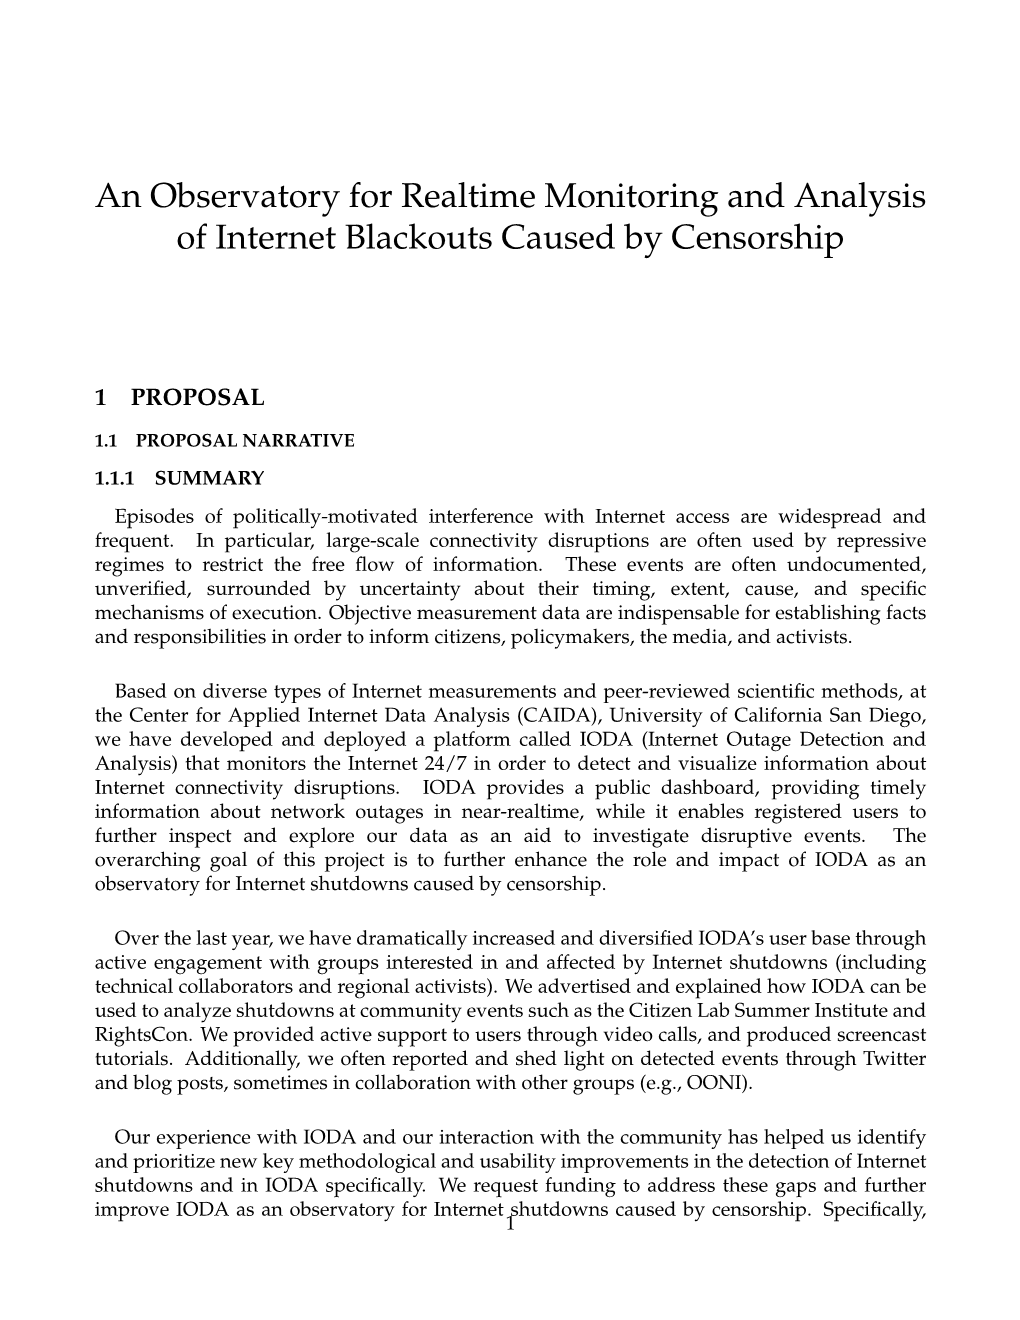 An Observatory for Realtime Monitoring and Analysis of Internet Blackouts Caused by Censorship